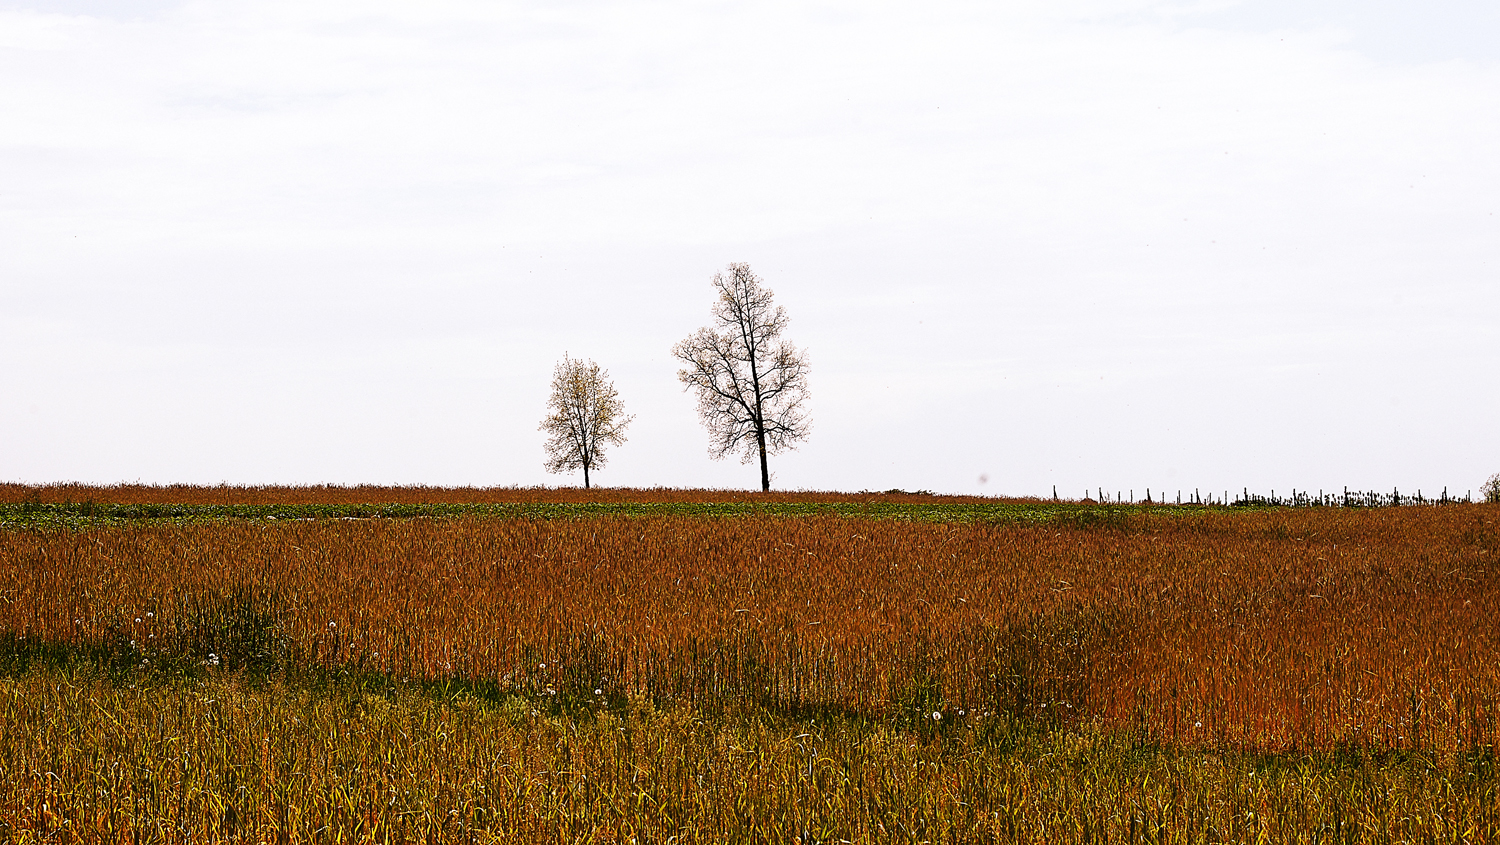 Autumn Farmscape.  2 trees keeping watch.